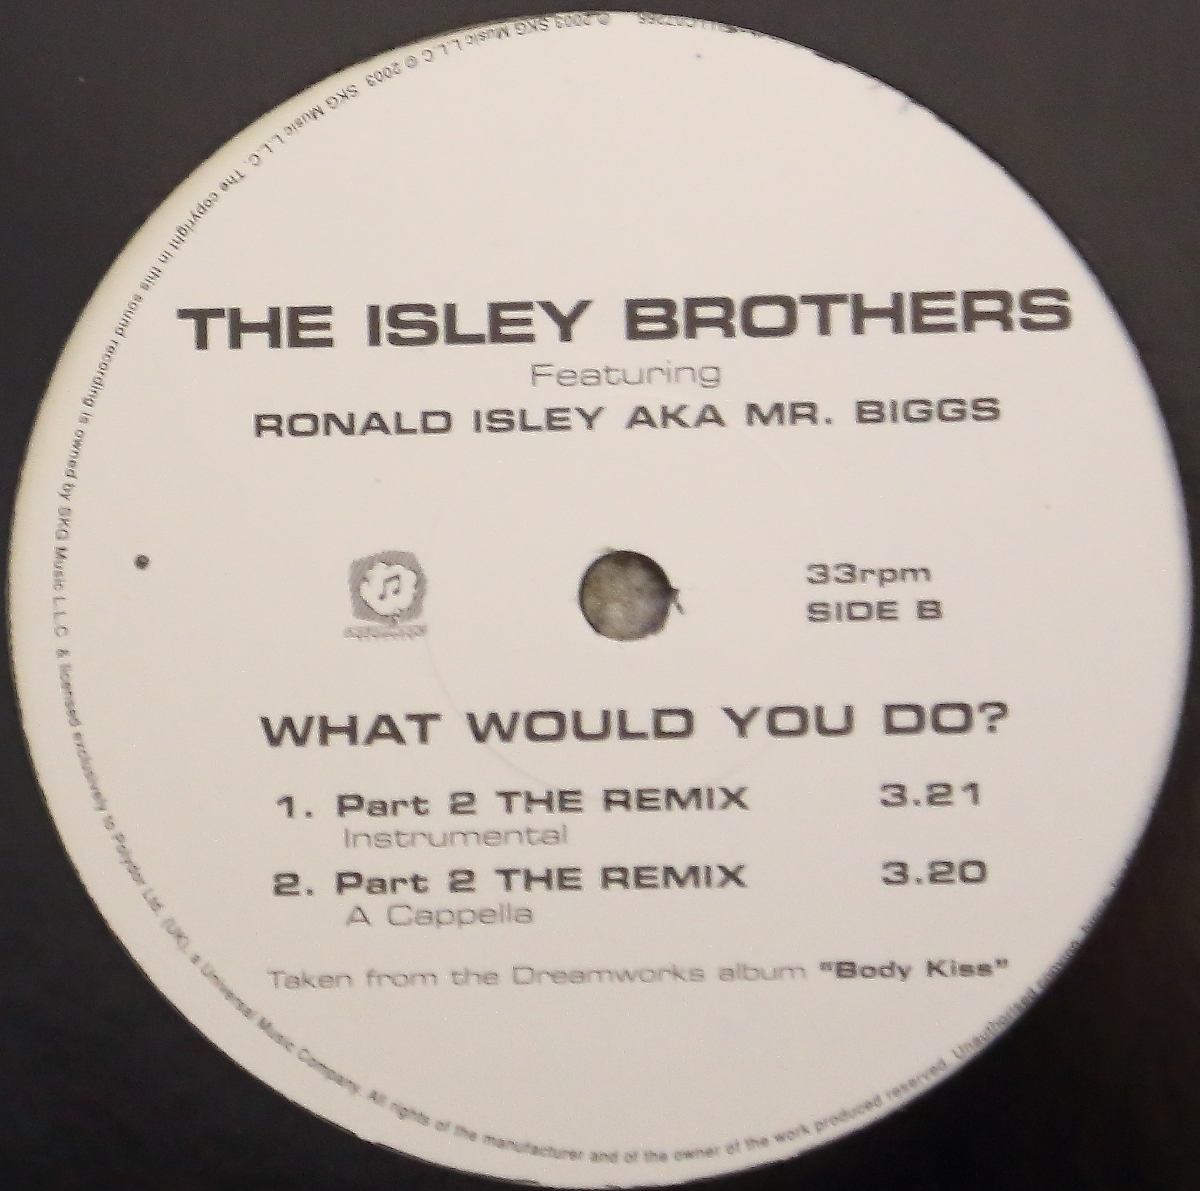 Isley Brothers - What would you do (LP Version / Part 2 The Remix / Remix Instrumental / Acappella) 12" Vinyl Promo